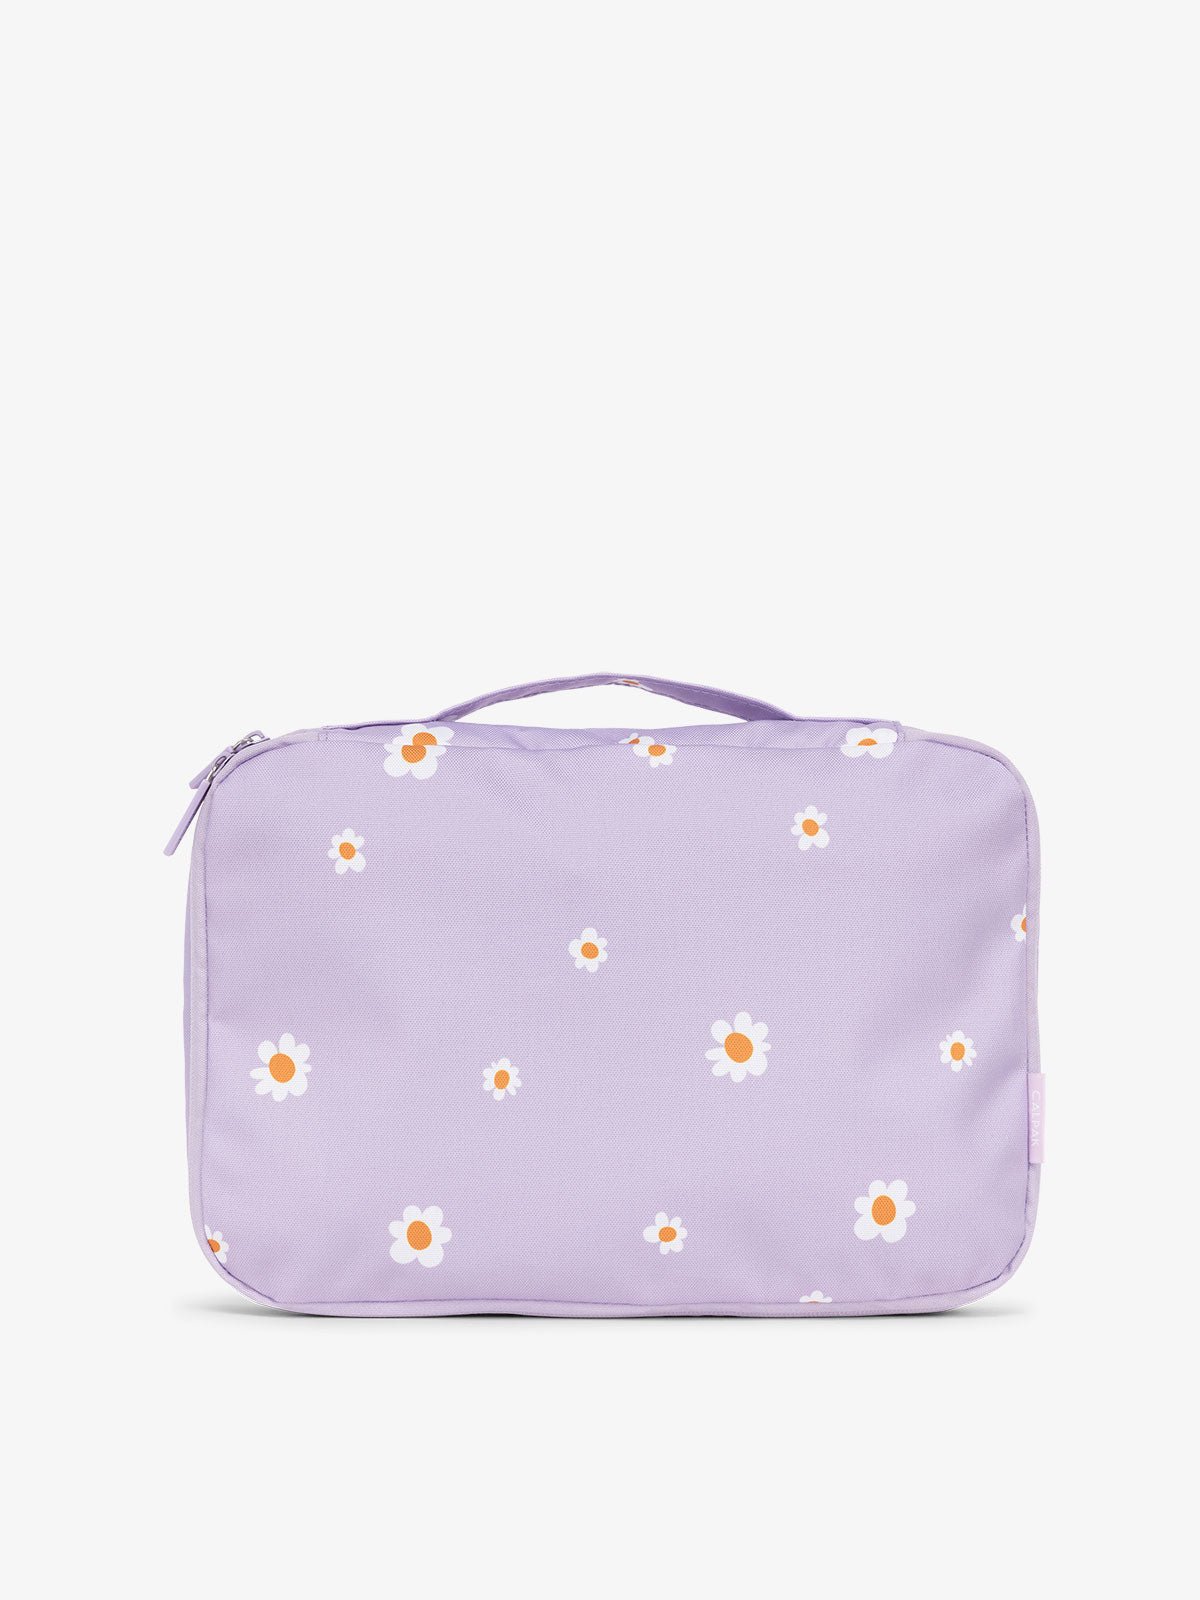 CALPAK packing cubes with top handle in purple floral print